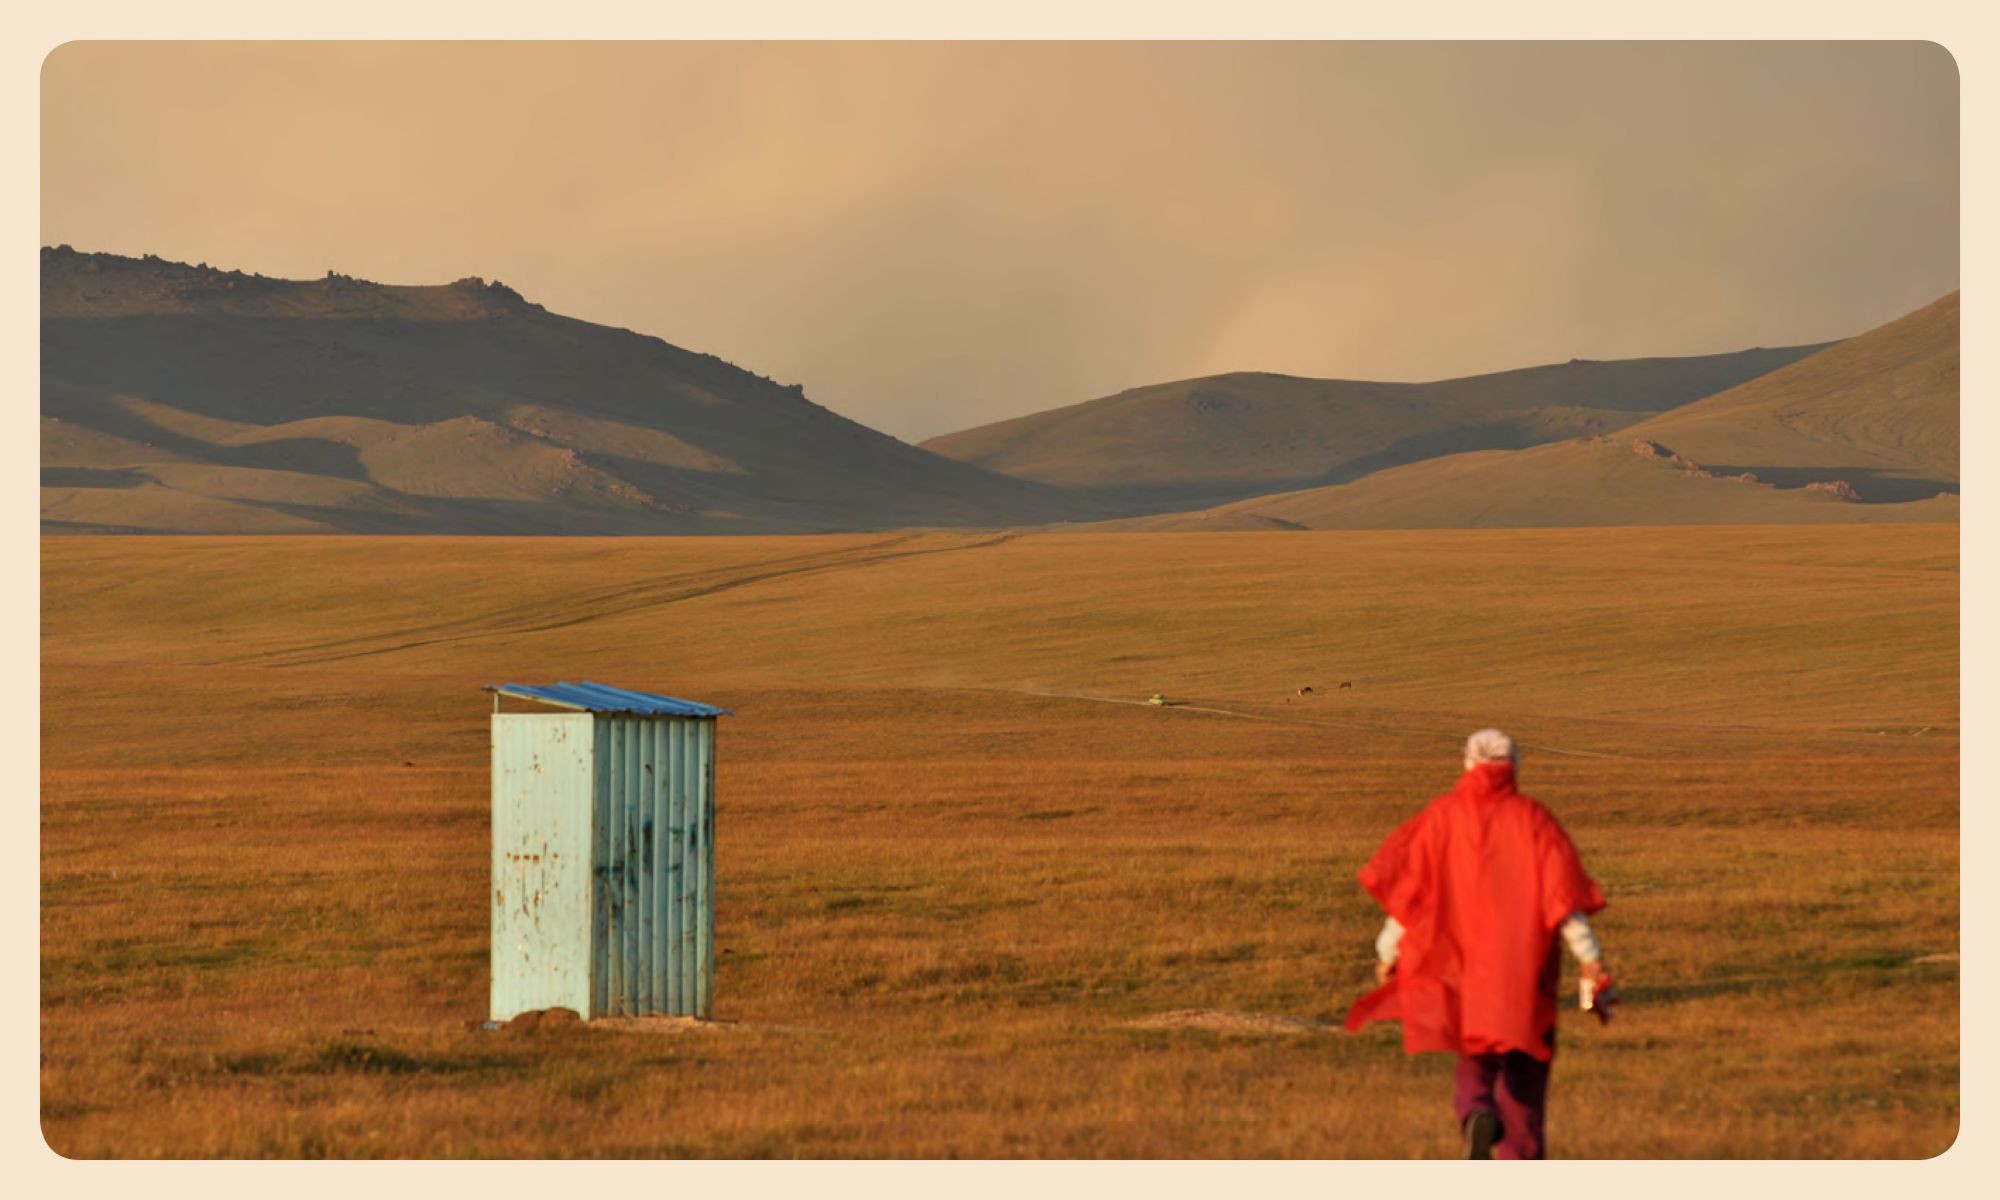 Pages 36-37: Woman in red, on the way to the outhouse